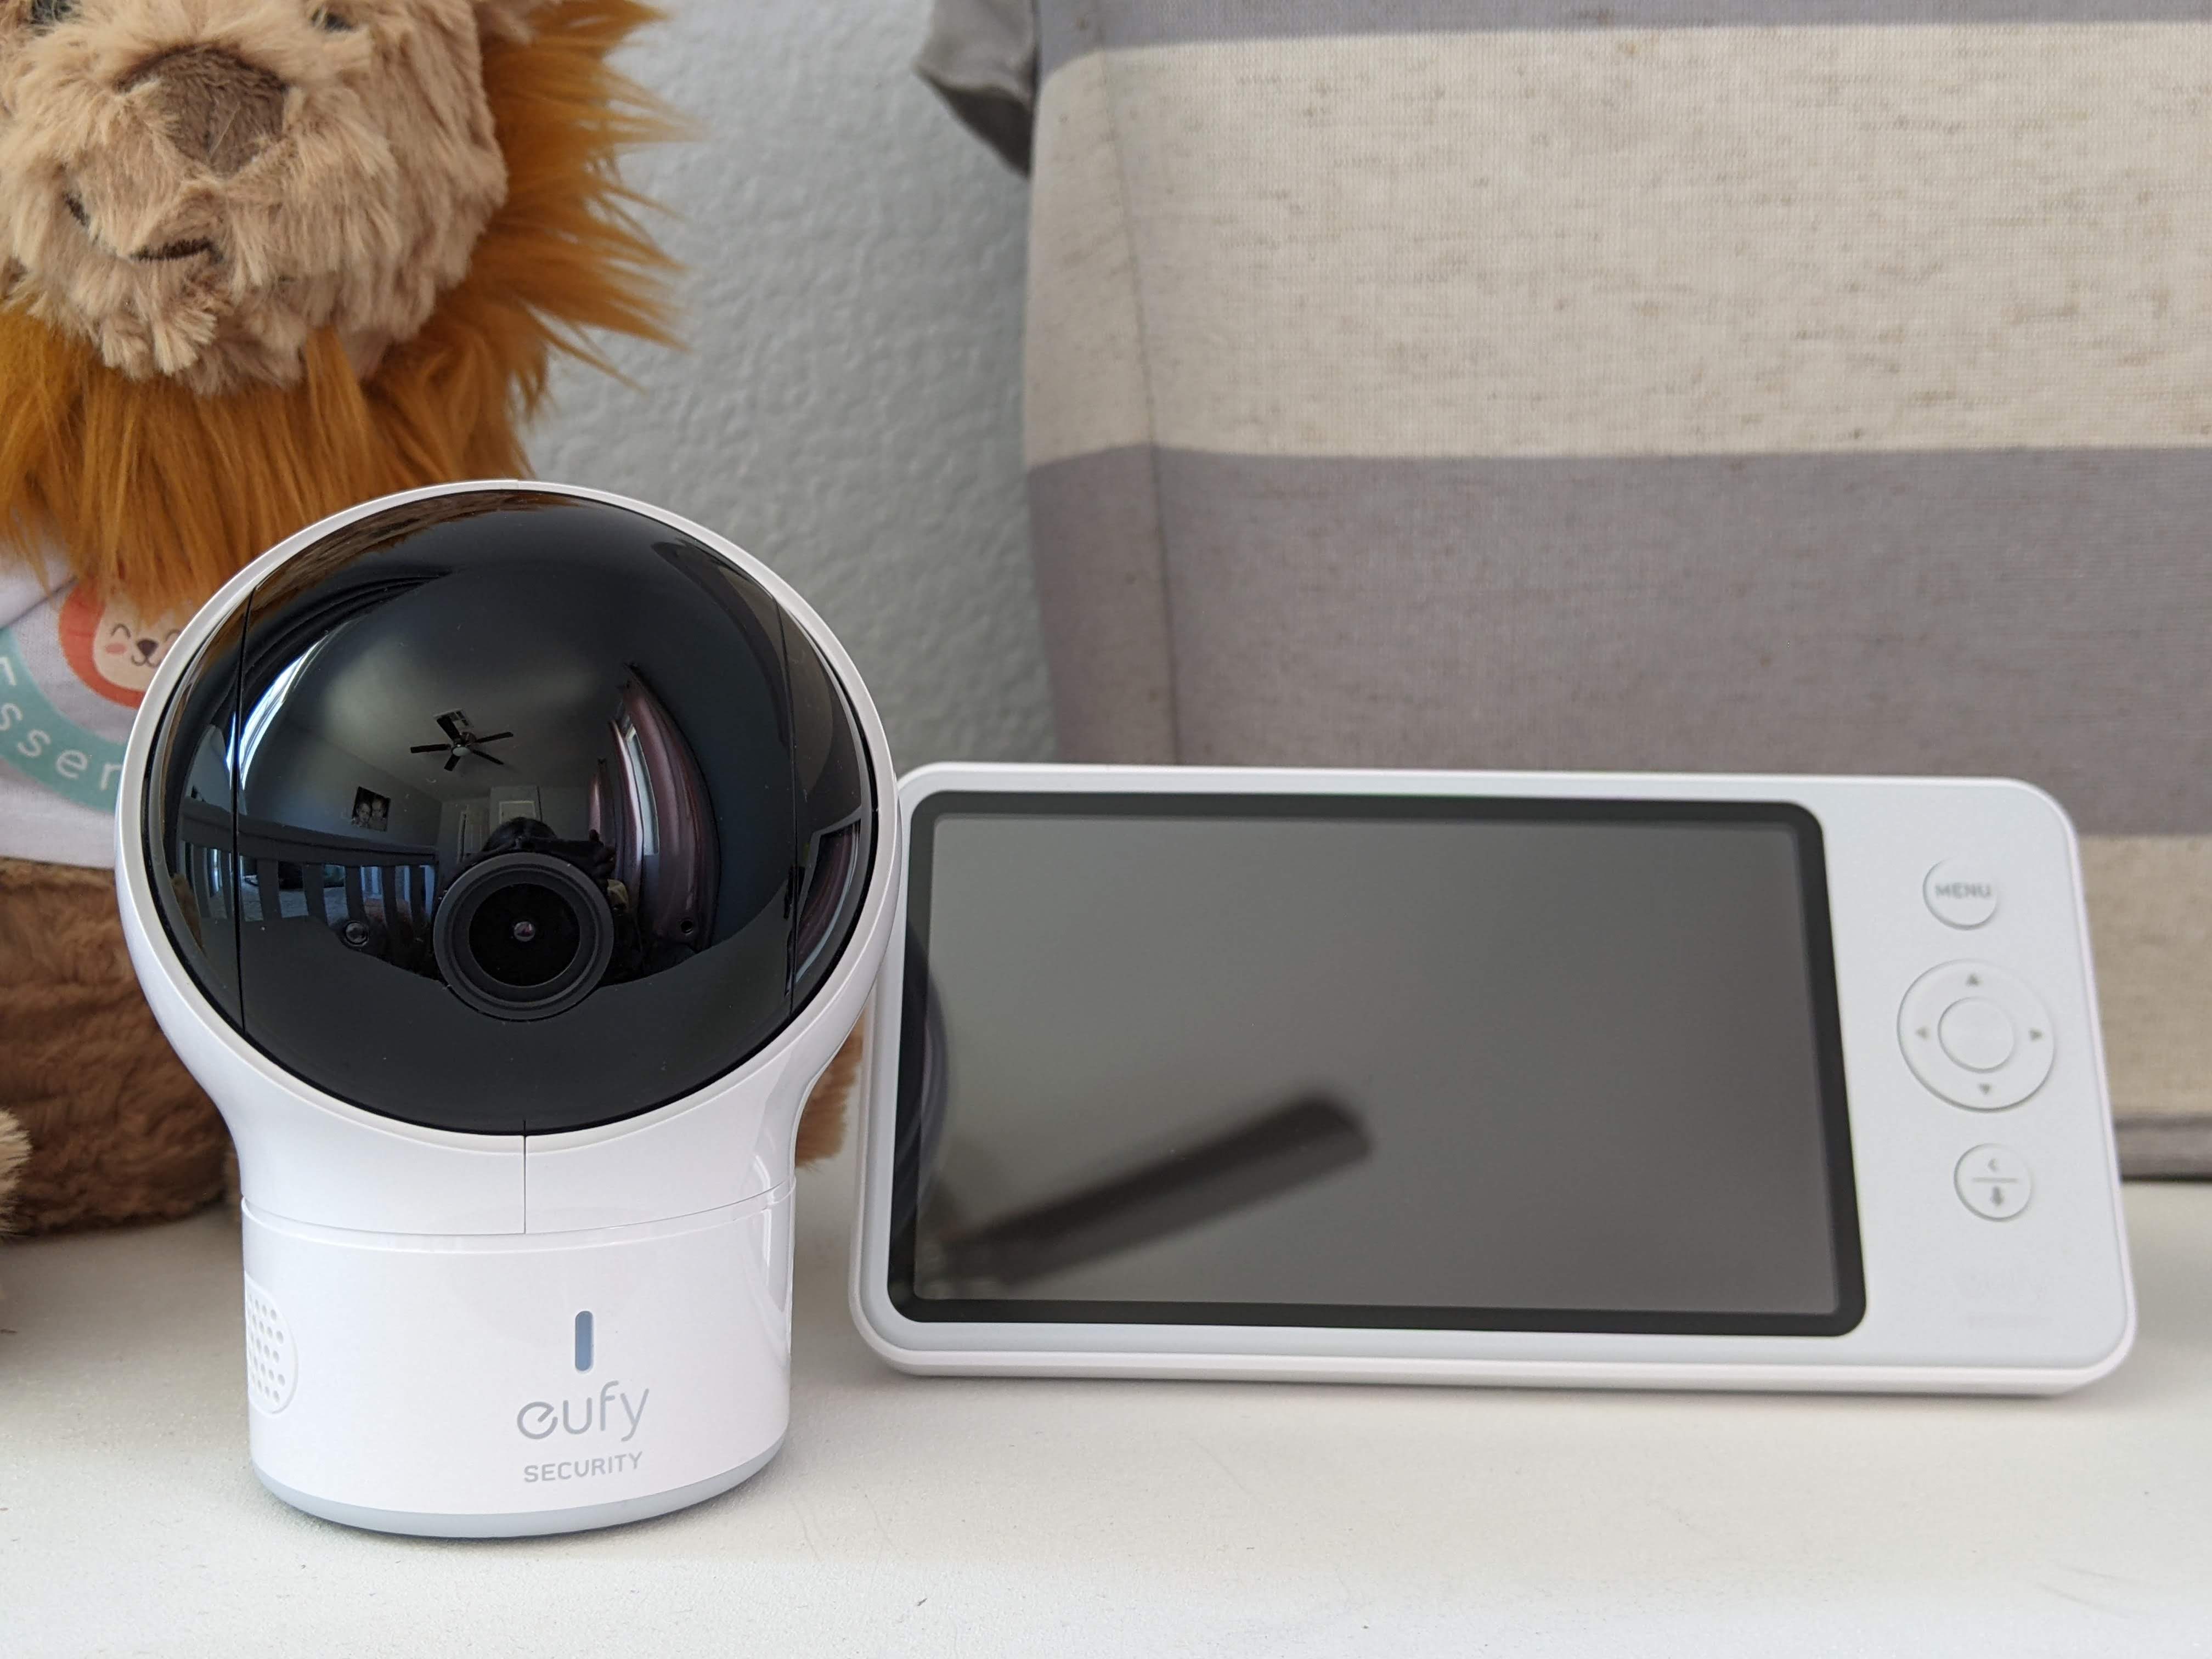 Eufy SpaceView Pro baby monitor review - BGE